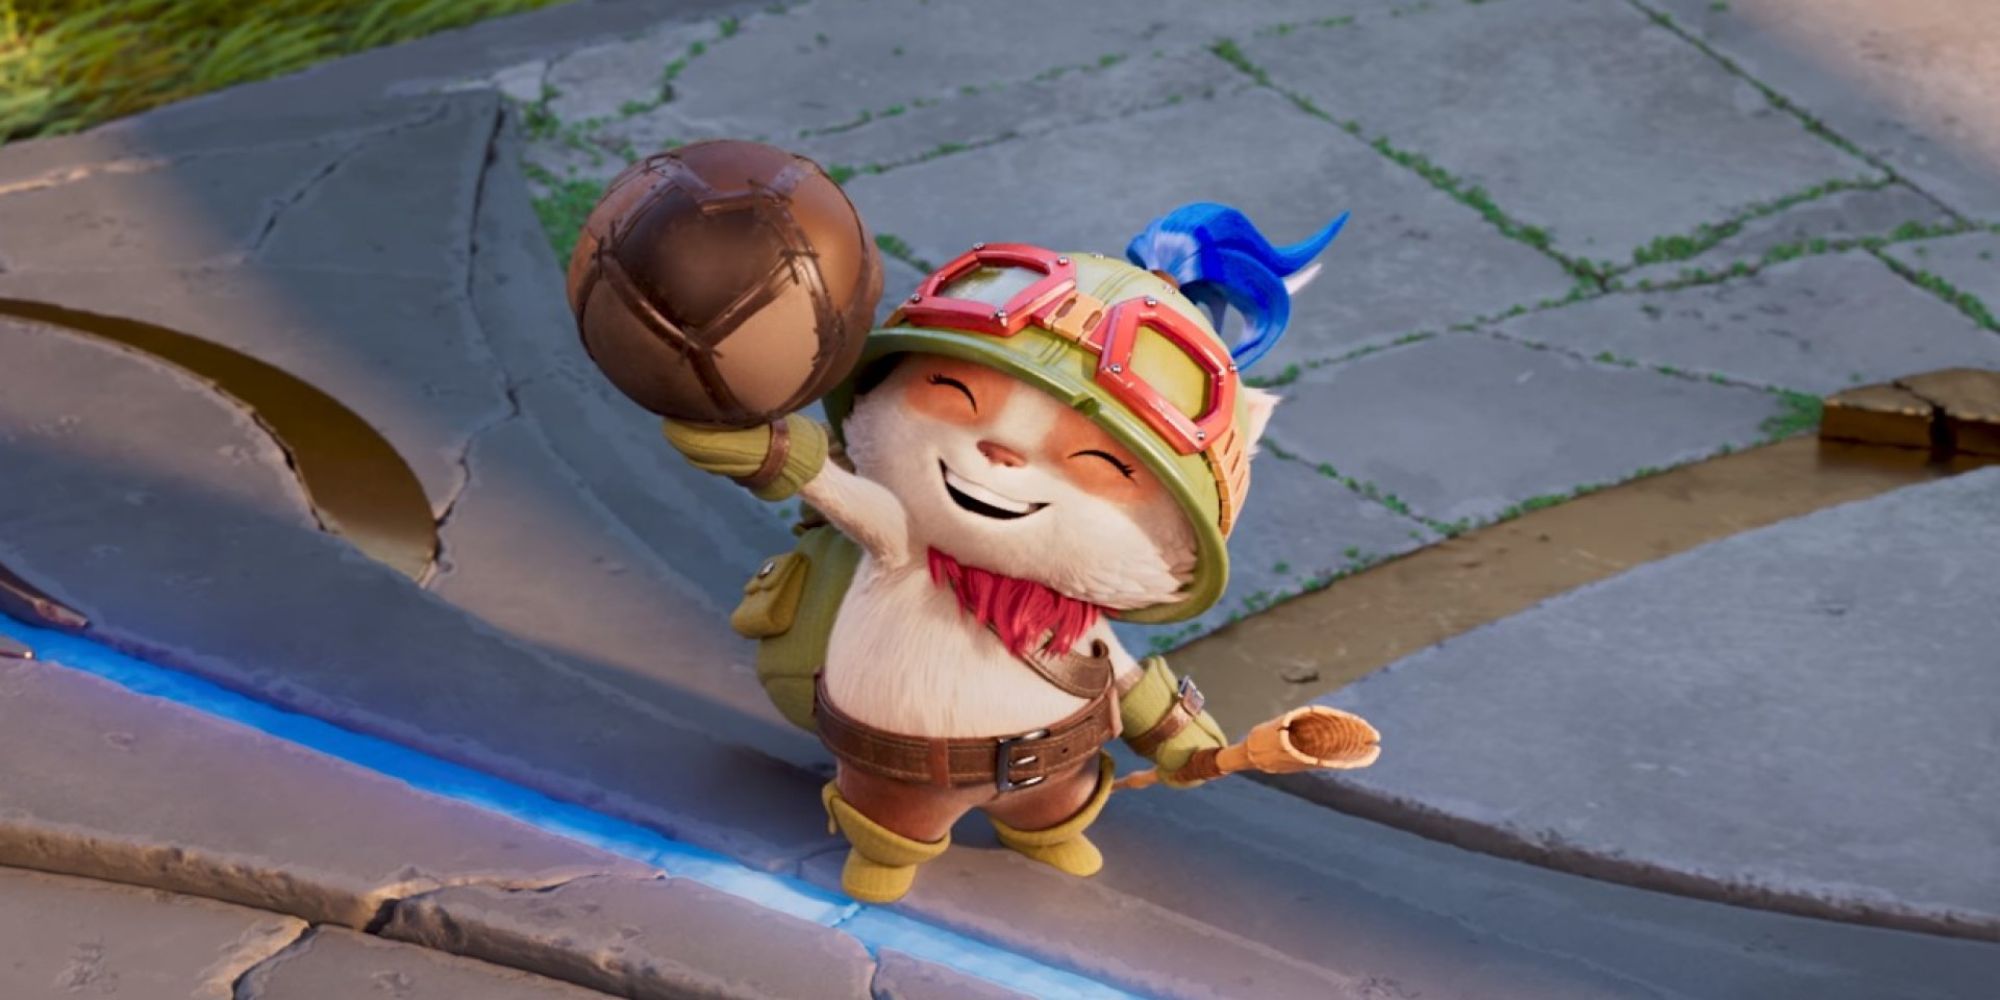 League of Legends Teemo Holding a Mushroom and Smiling